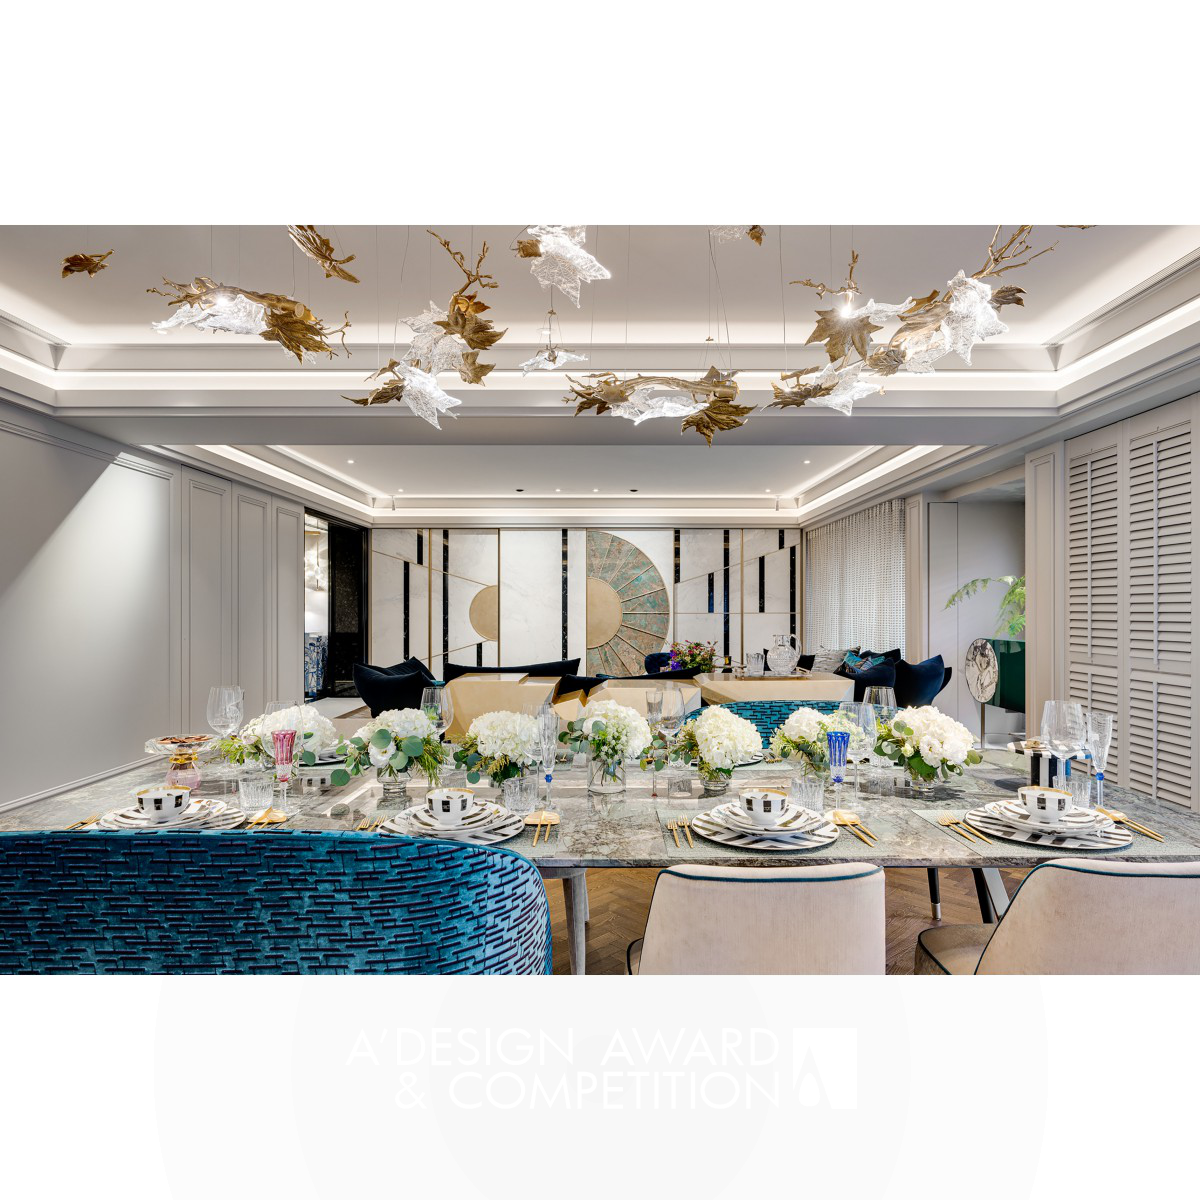 Idan Chiang of L'atelier Fantasia Unveils "Jewelry Box" - A Luxurious Apartment Interior